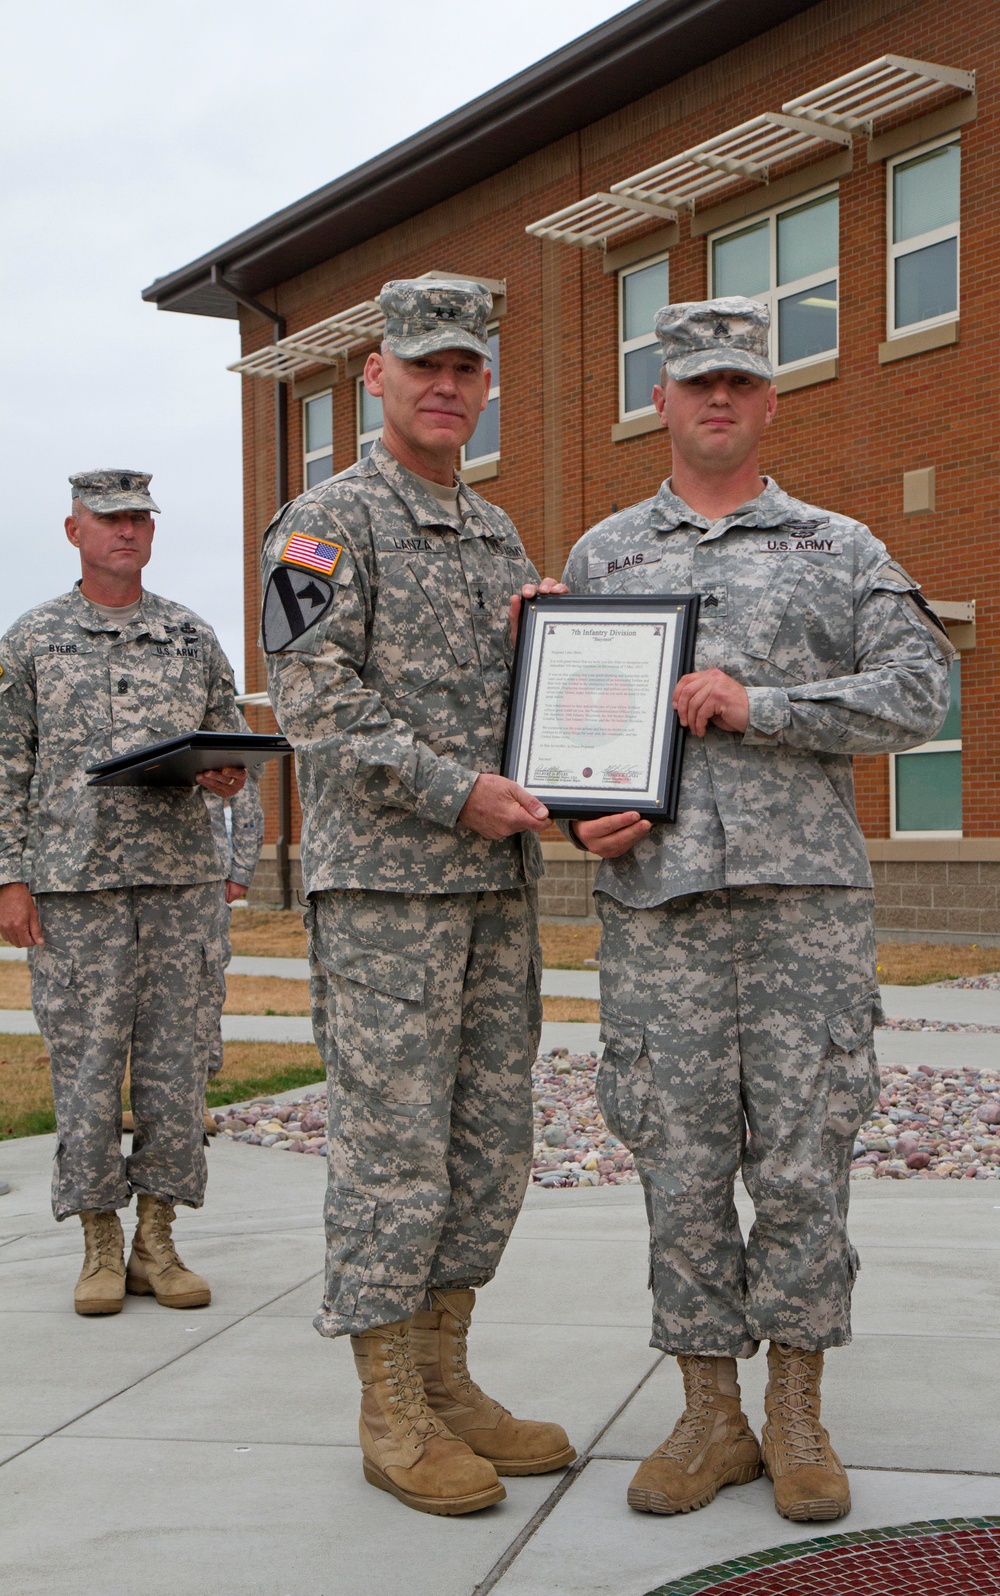 Soldier's life-saving actions earn him recognition from 7ID leadership